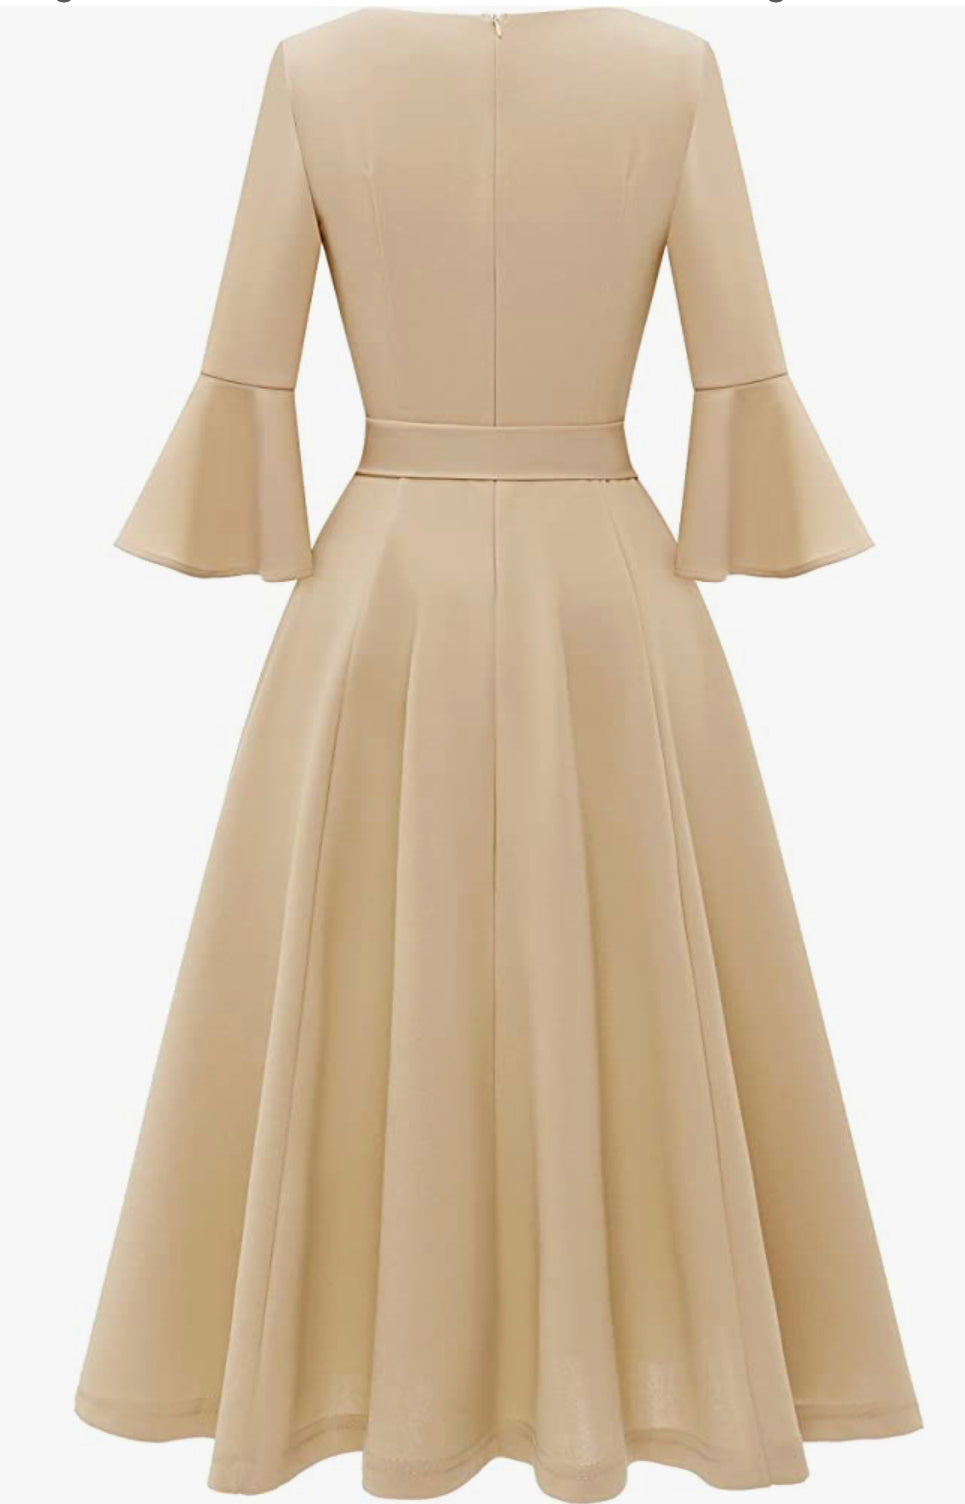 Elegant Bell Sleeve Cocktail Dress, Sizes Small - 3XLarge (Champagne)